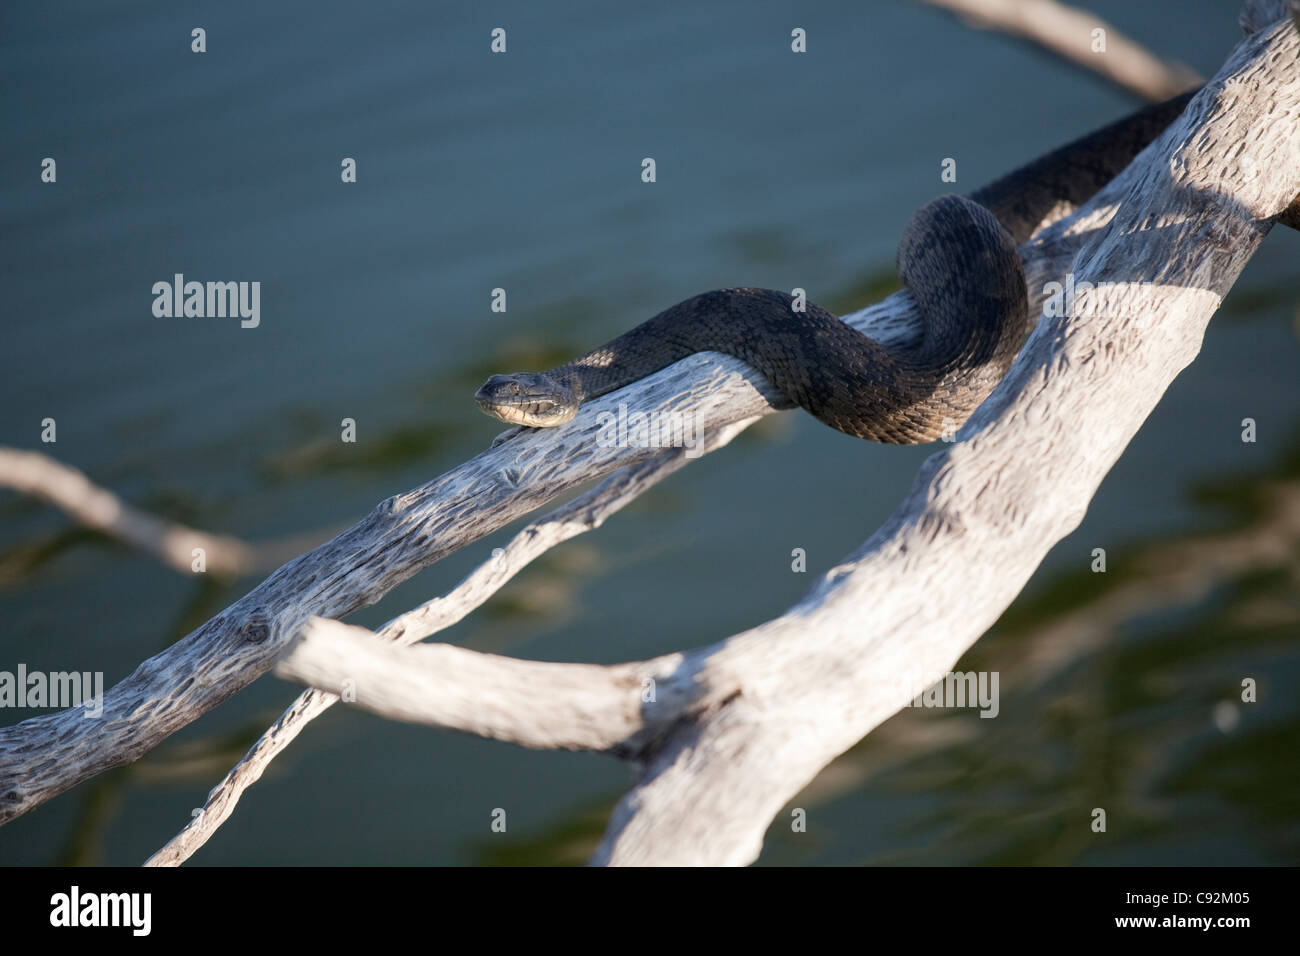 Venomous snake commonly known as a water moccasin (Agkistrodon piscivorus) suns itself on a branch in Falcon Lake in South Texas Stock Photo